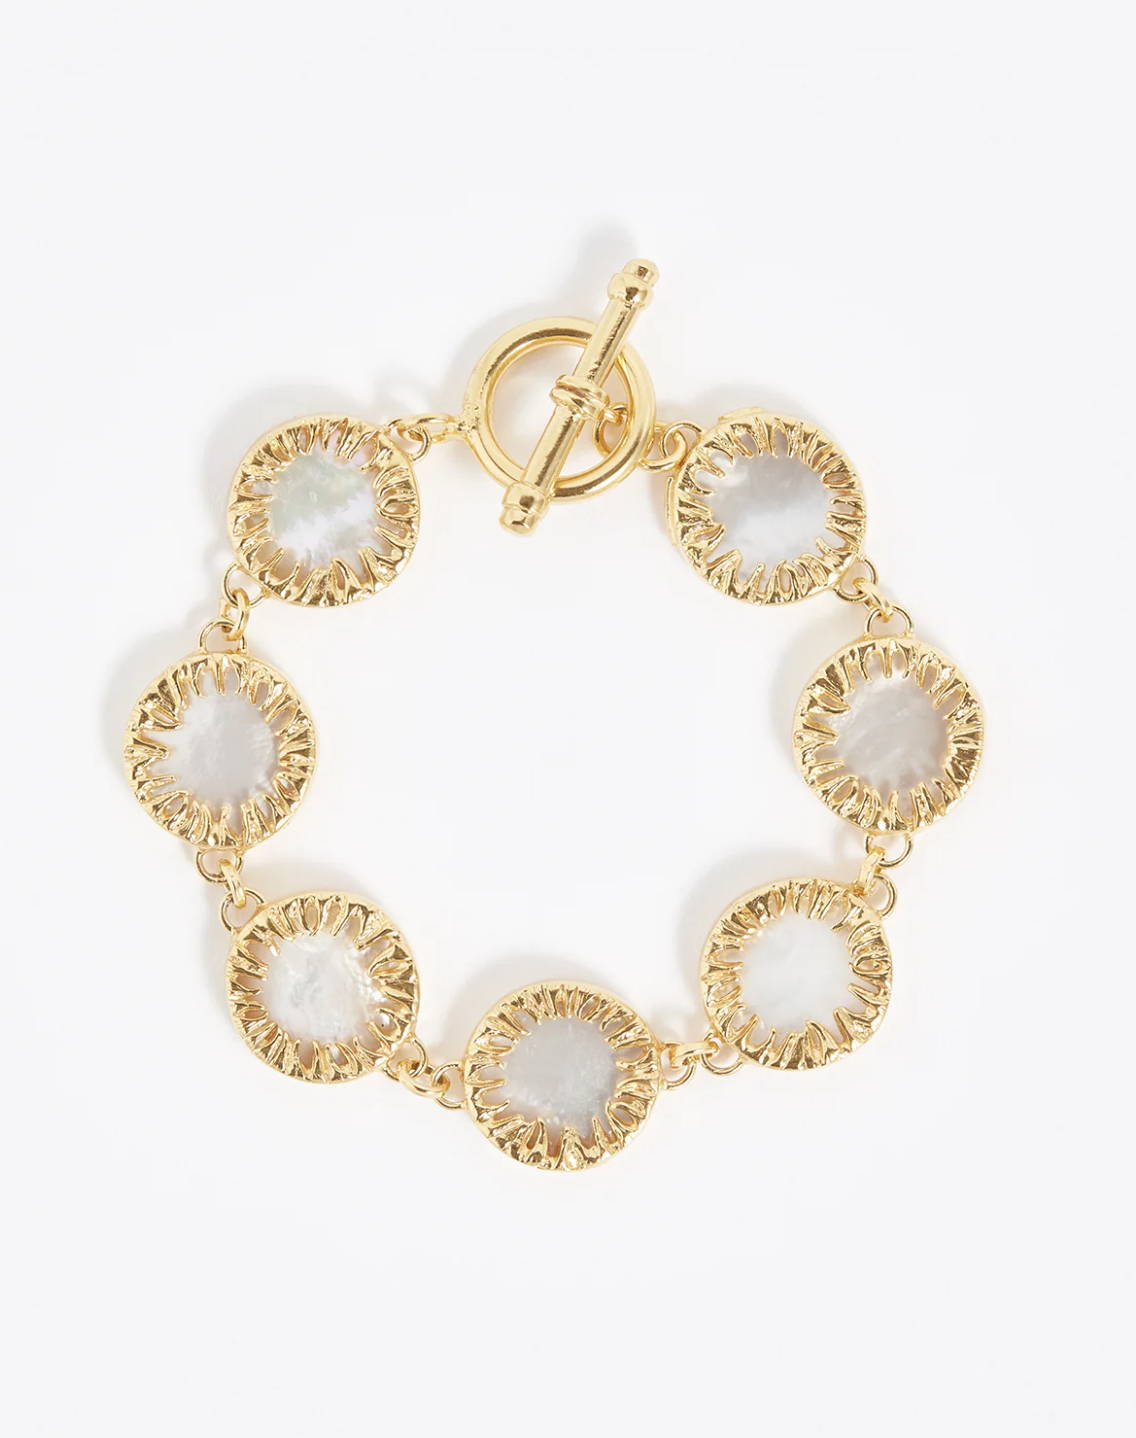 Soru jewellery mother of pearl Apollo gold bracelet 18ct gold plated silver and mother of pearl gemstones